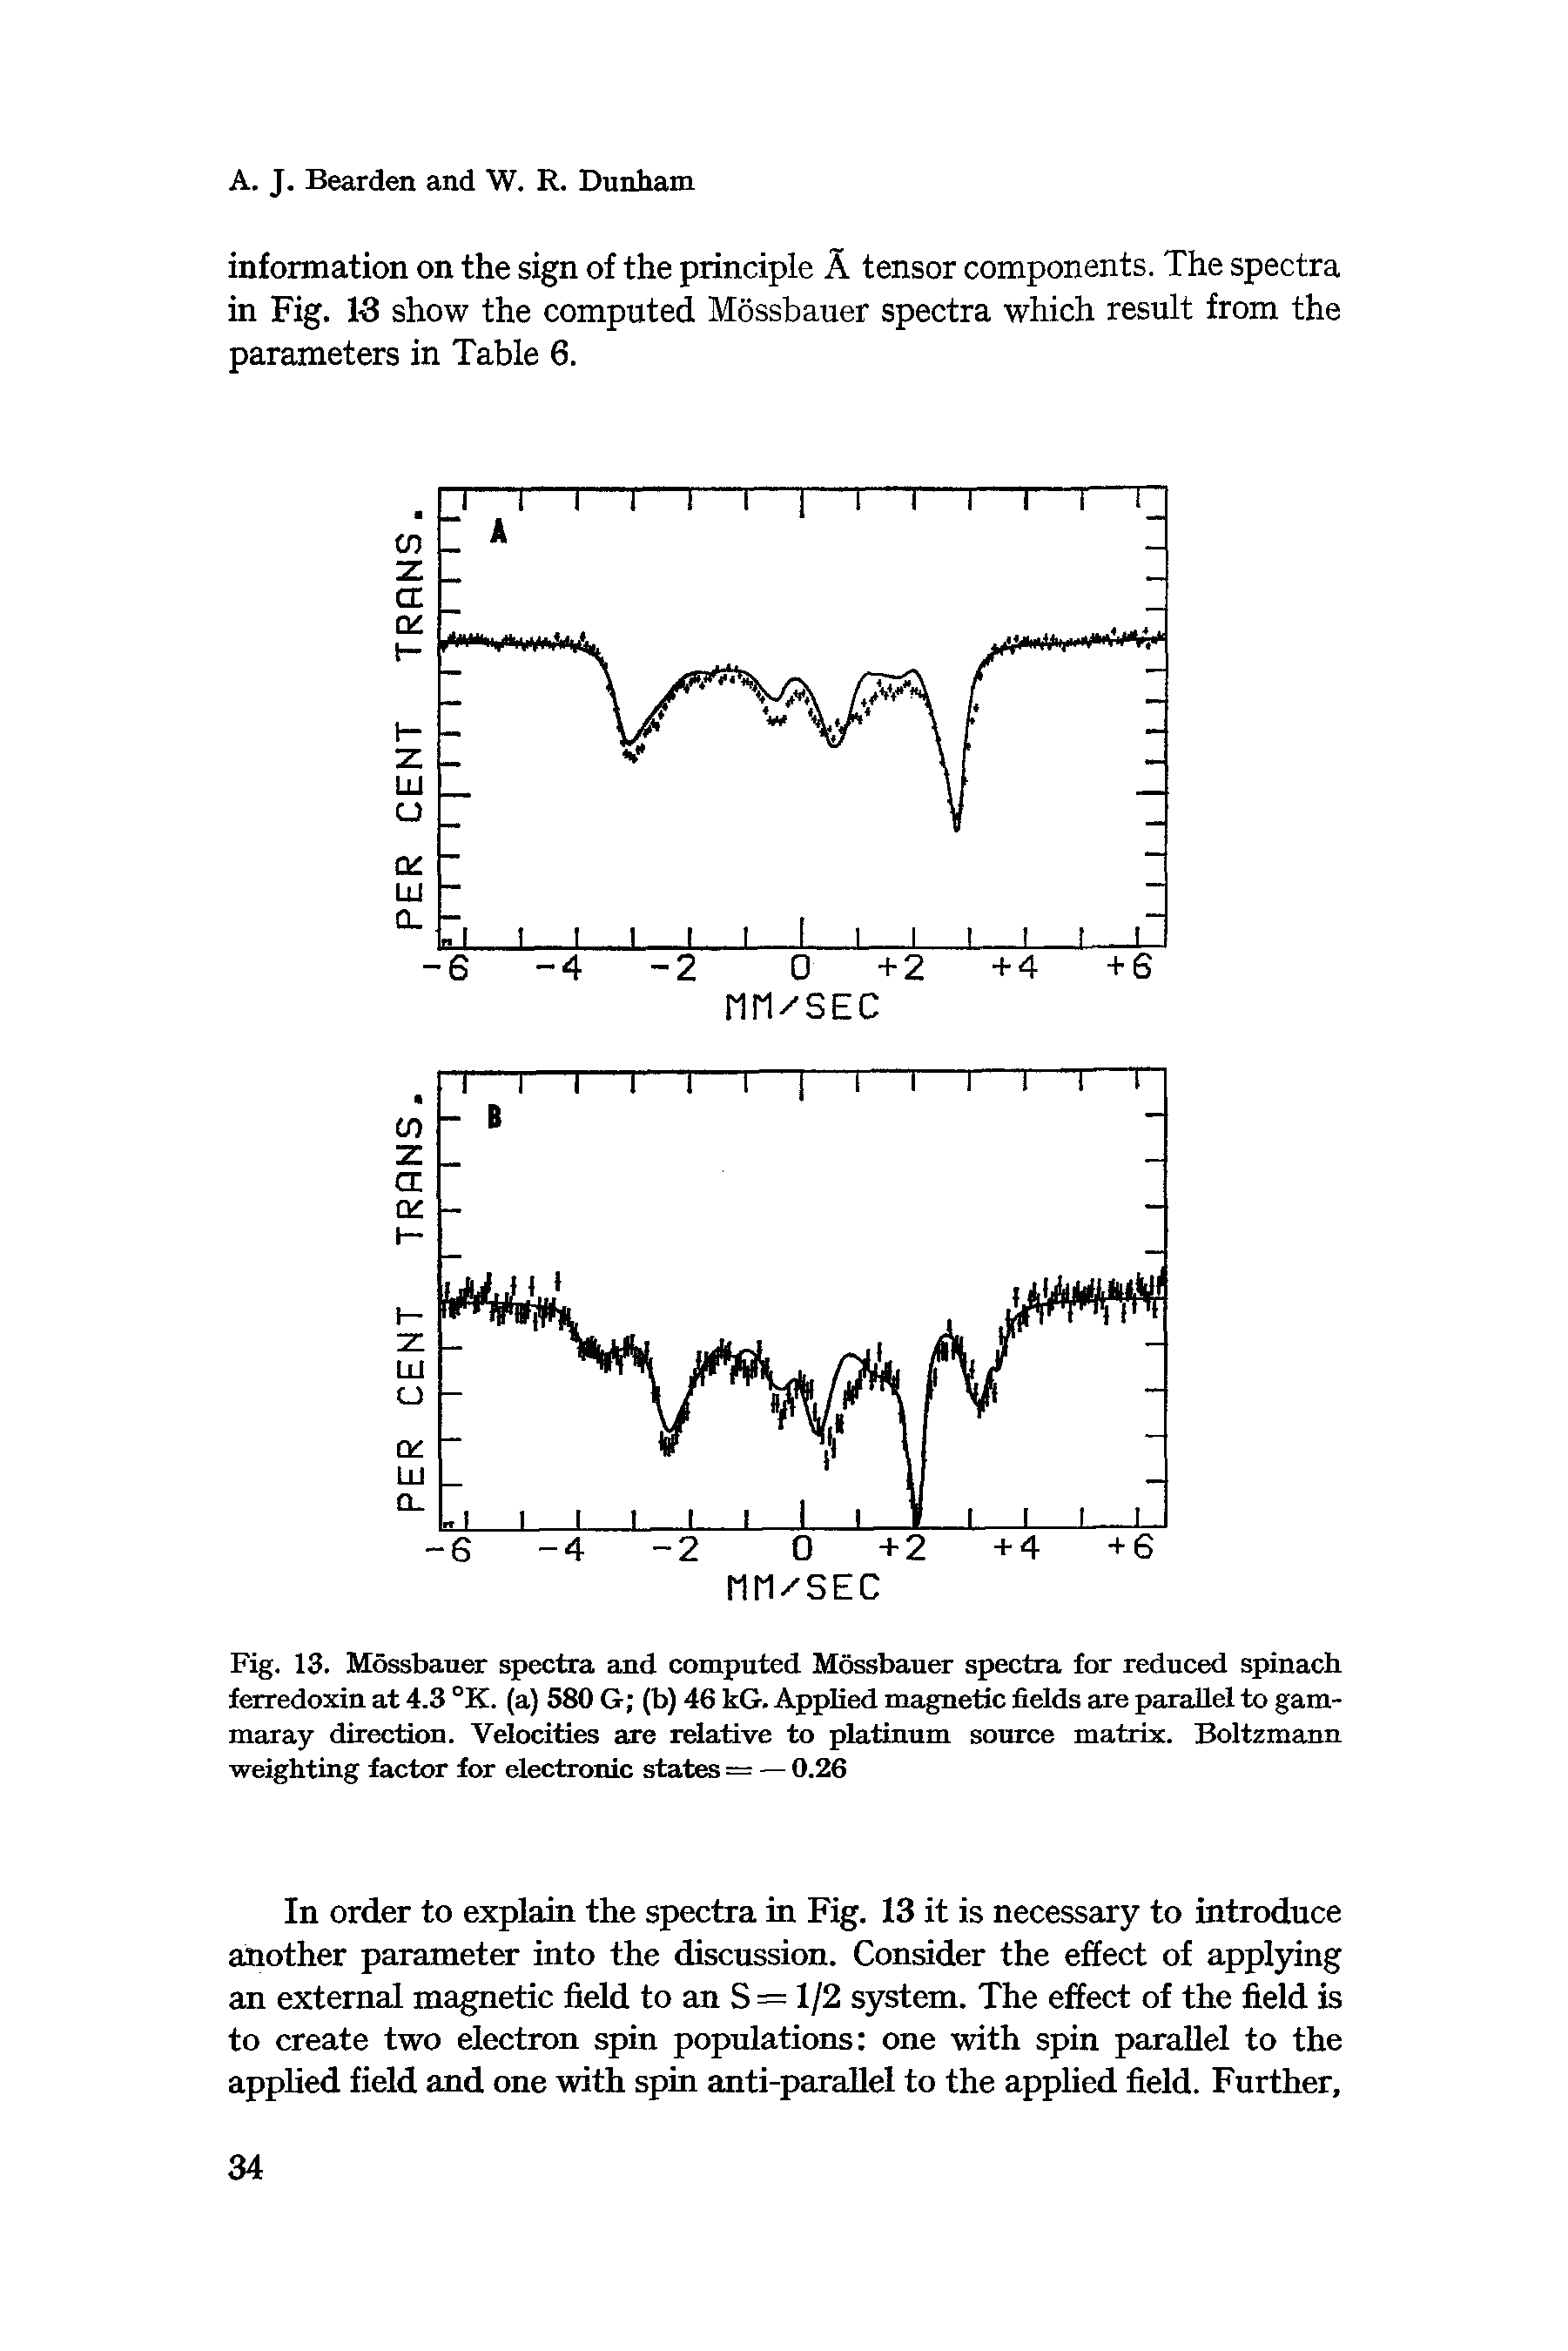 Fig. 13. Mossbauer spectra and computed Mossbauer spectra for reduced spinach ferredoxin at 4.3 °K. (a) 580 G (b) 46 kG. Applied magnetic fields are parallel to gam-maray direction. Velocities are relative to platinum source matrix. Boltzmann weighting factor for electronic states = — 0.26...